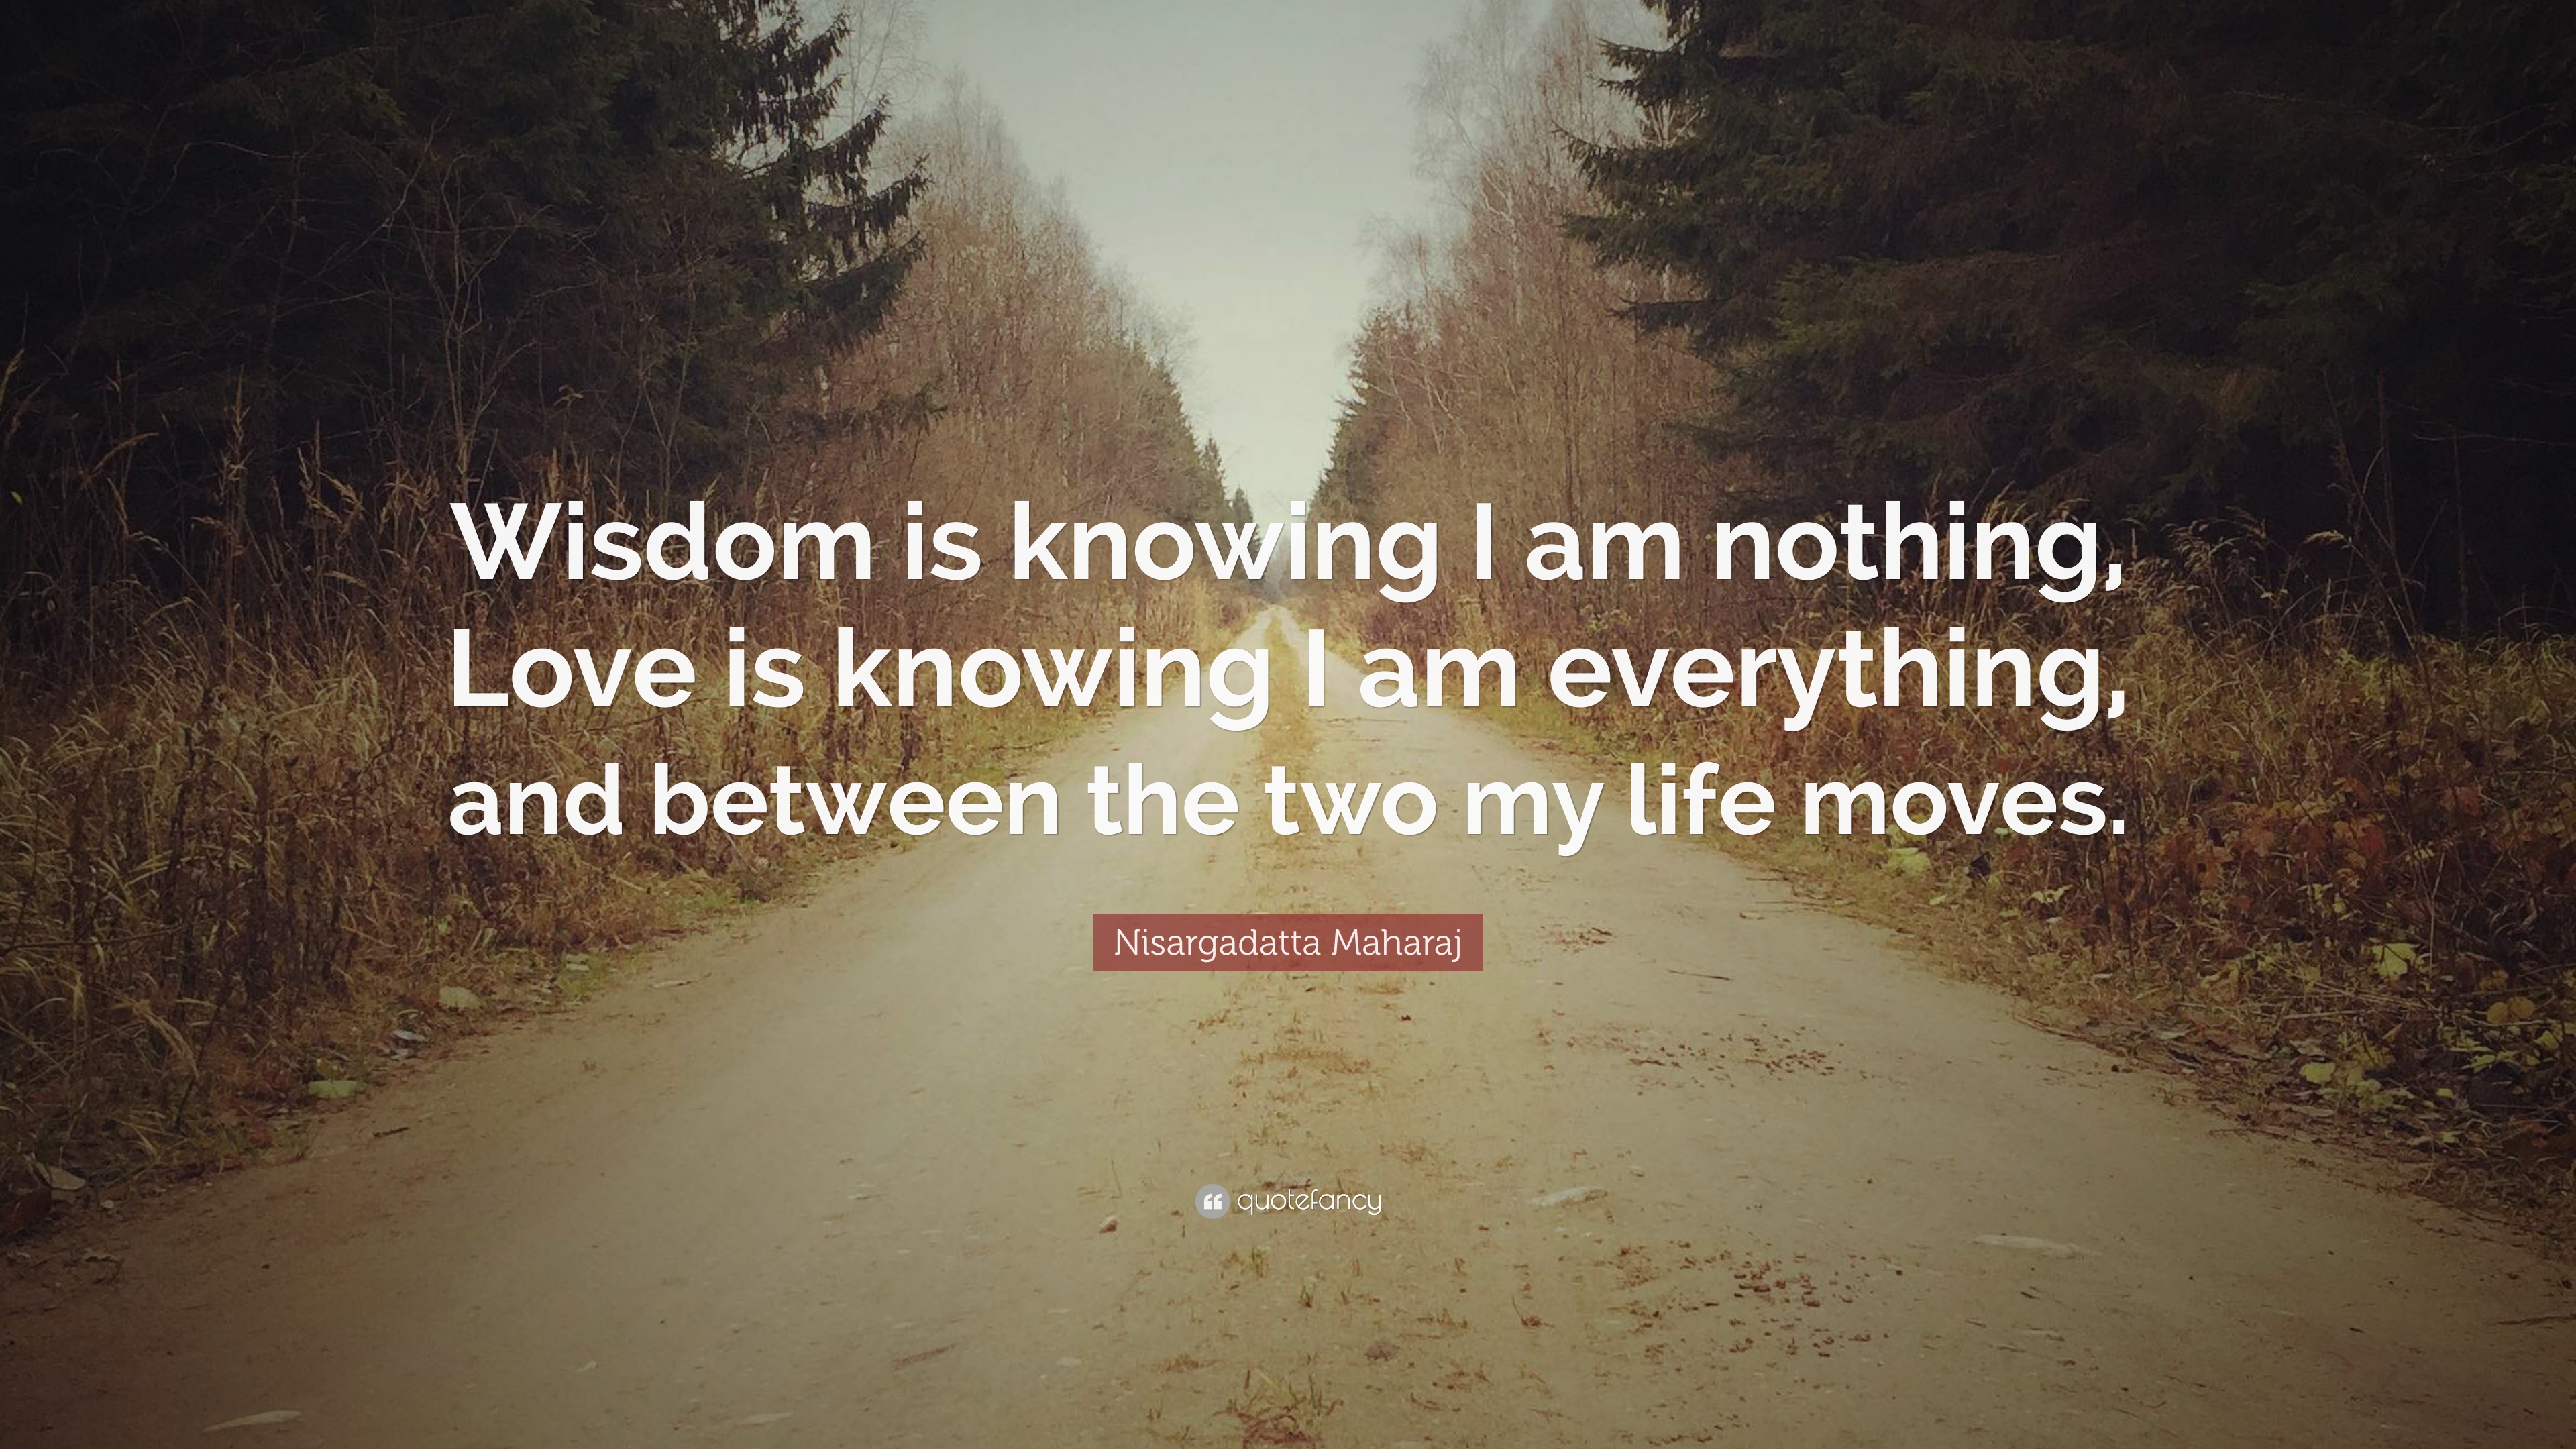 365800-Nisargadatta-Maharaj-Quote-Wisdom-is-knowing-I-am-nothing-Love-is